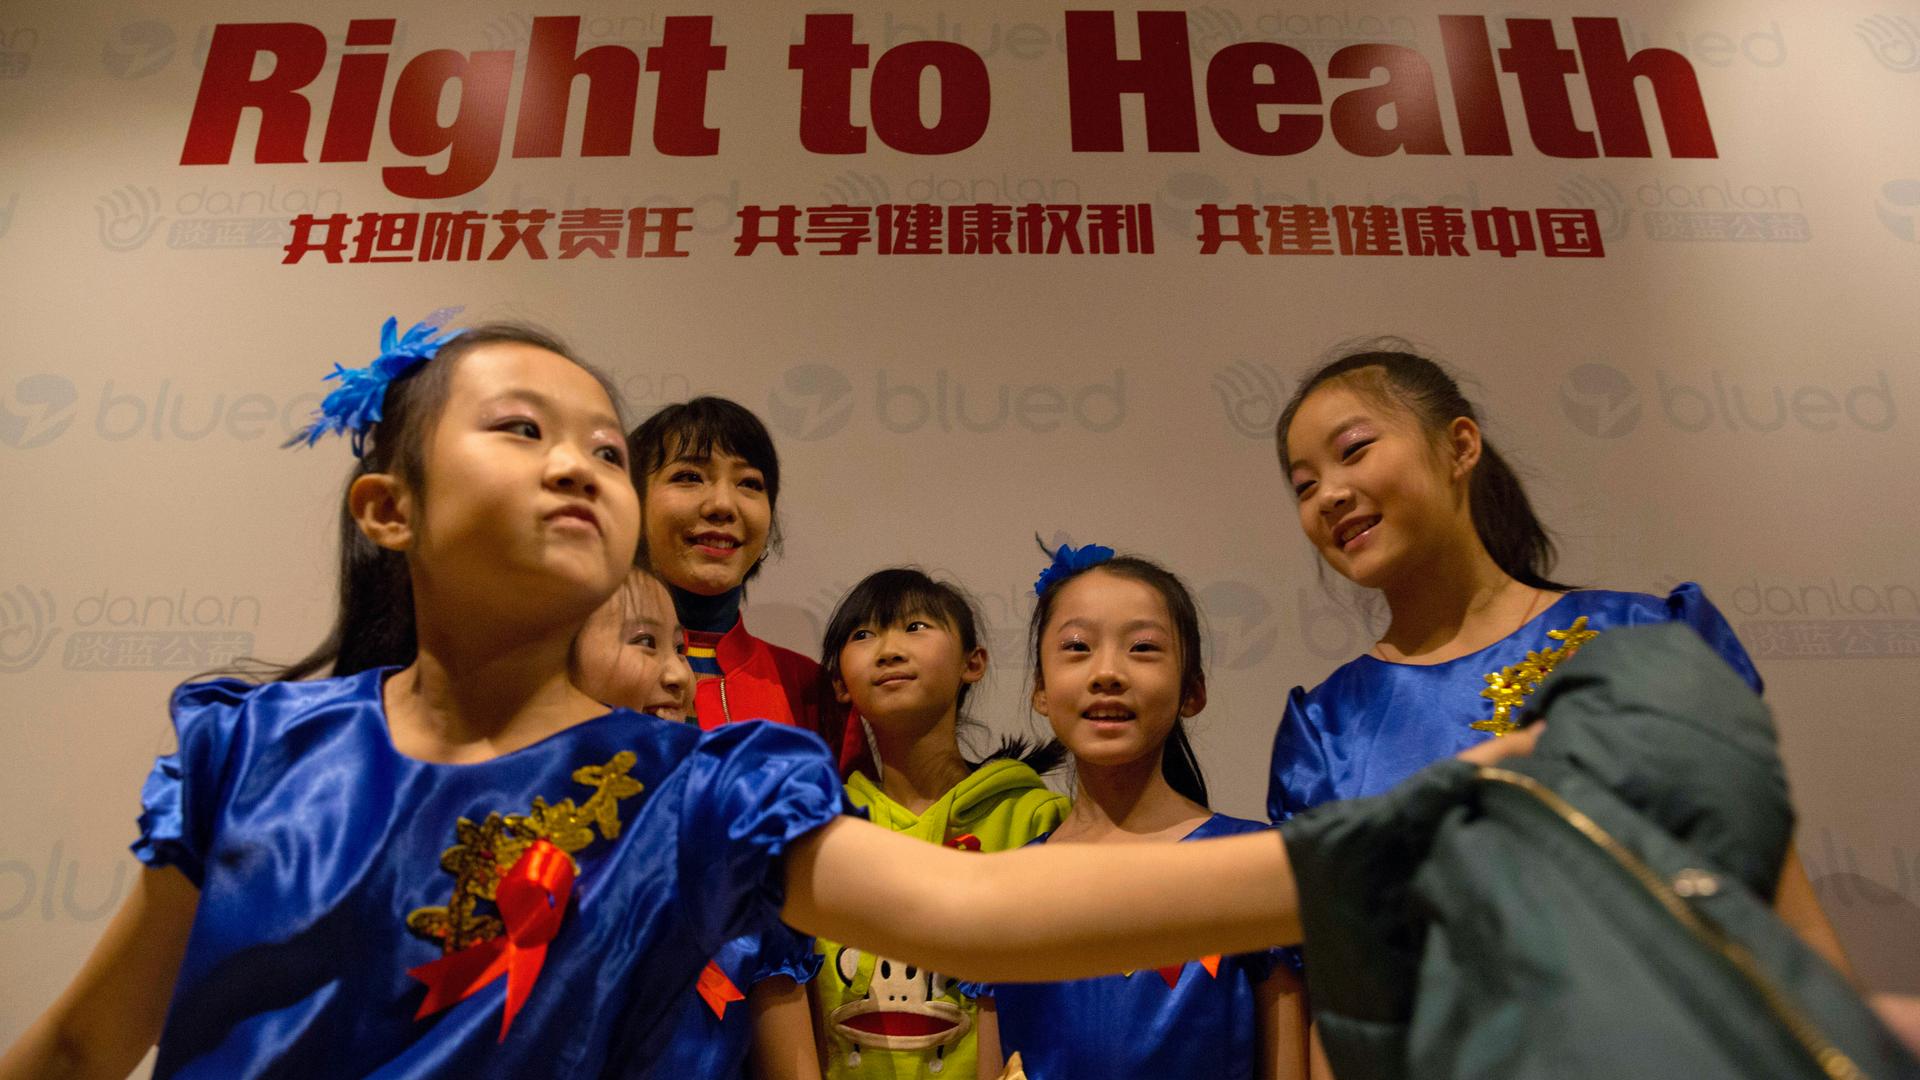 Chinese singer Wu Mochou, in red, poses for photos with young performers at an event to raise awareness ahead of World AIDS Day in Beijing, Nov. 14, 2017. The event was hosted by Danlan Public Welfare ahead of the 30th World AIDS Day to promote the use of